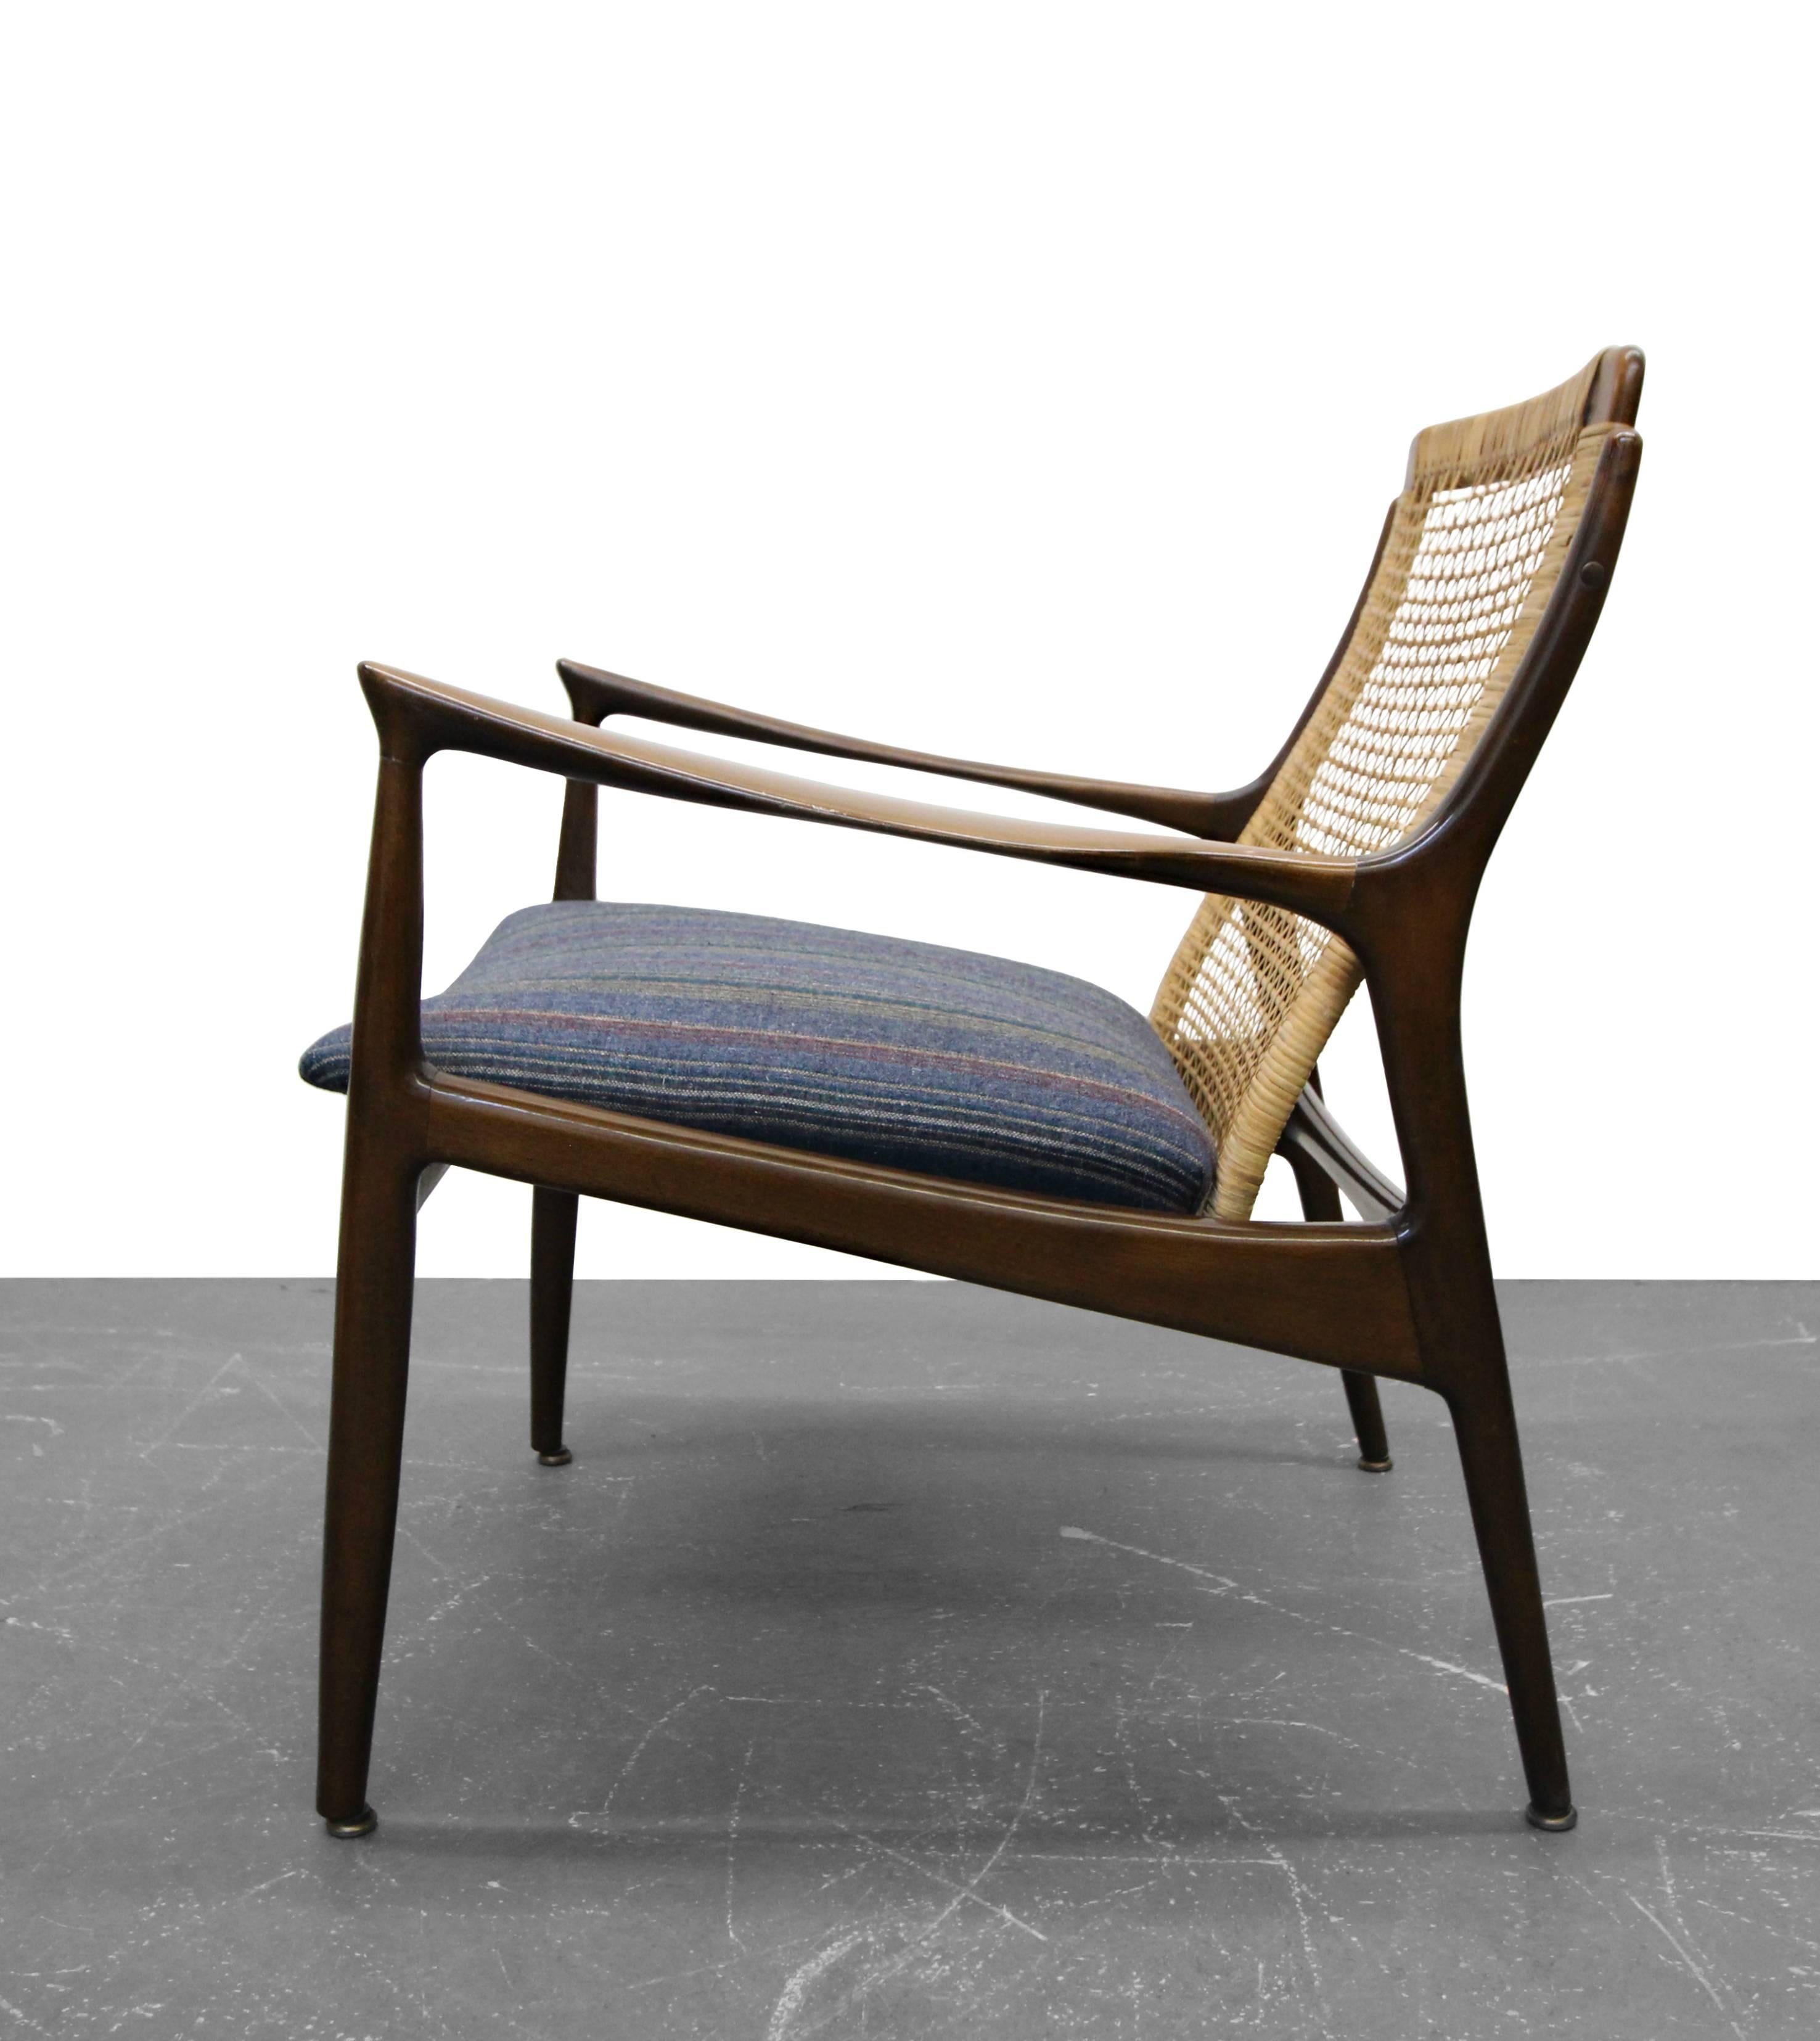 Classic Danish lounge chair by IB Kofod Larsen. A simply beautiful chair with great lines and a stunning profile. Chair has a newly upholstered seat. Walnut frame is all original and in good, solid condition. Chair shows minimal signs of age